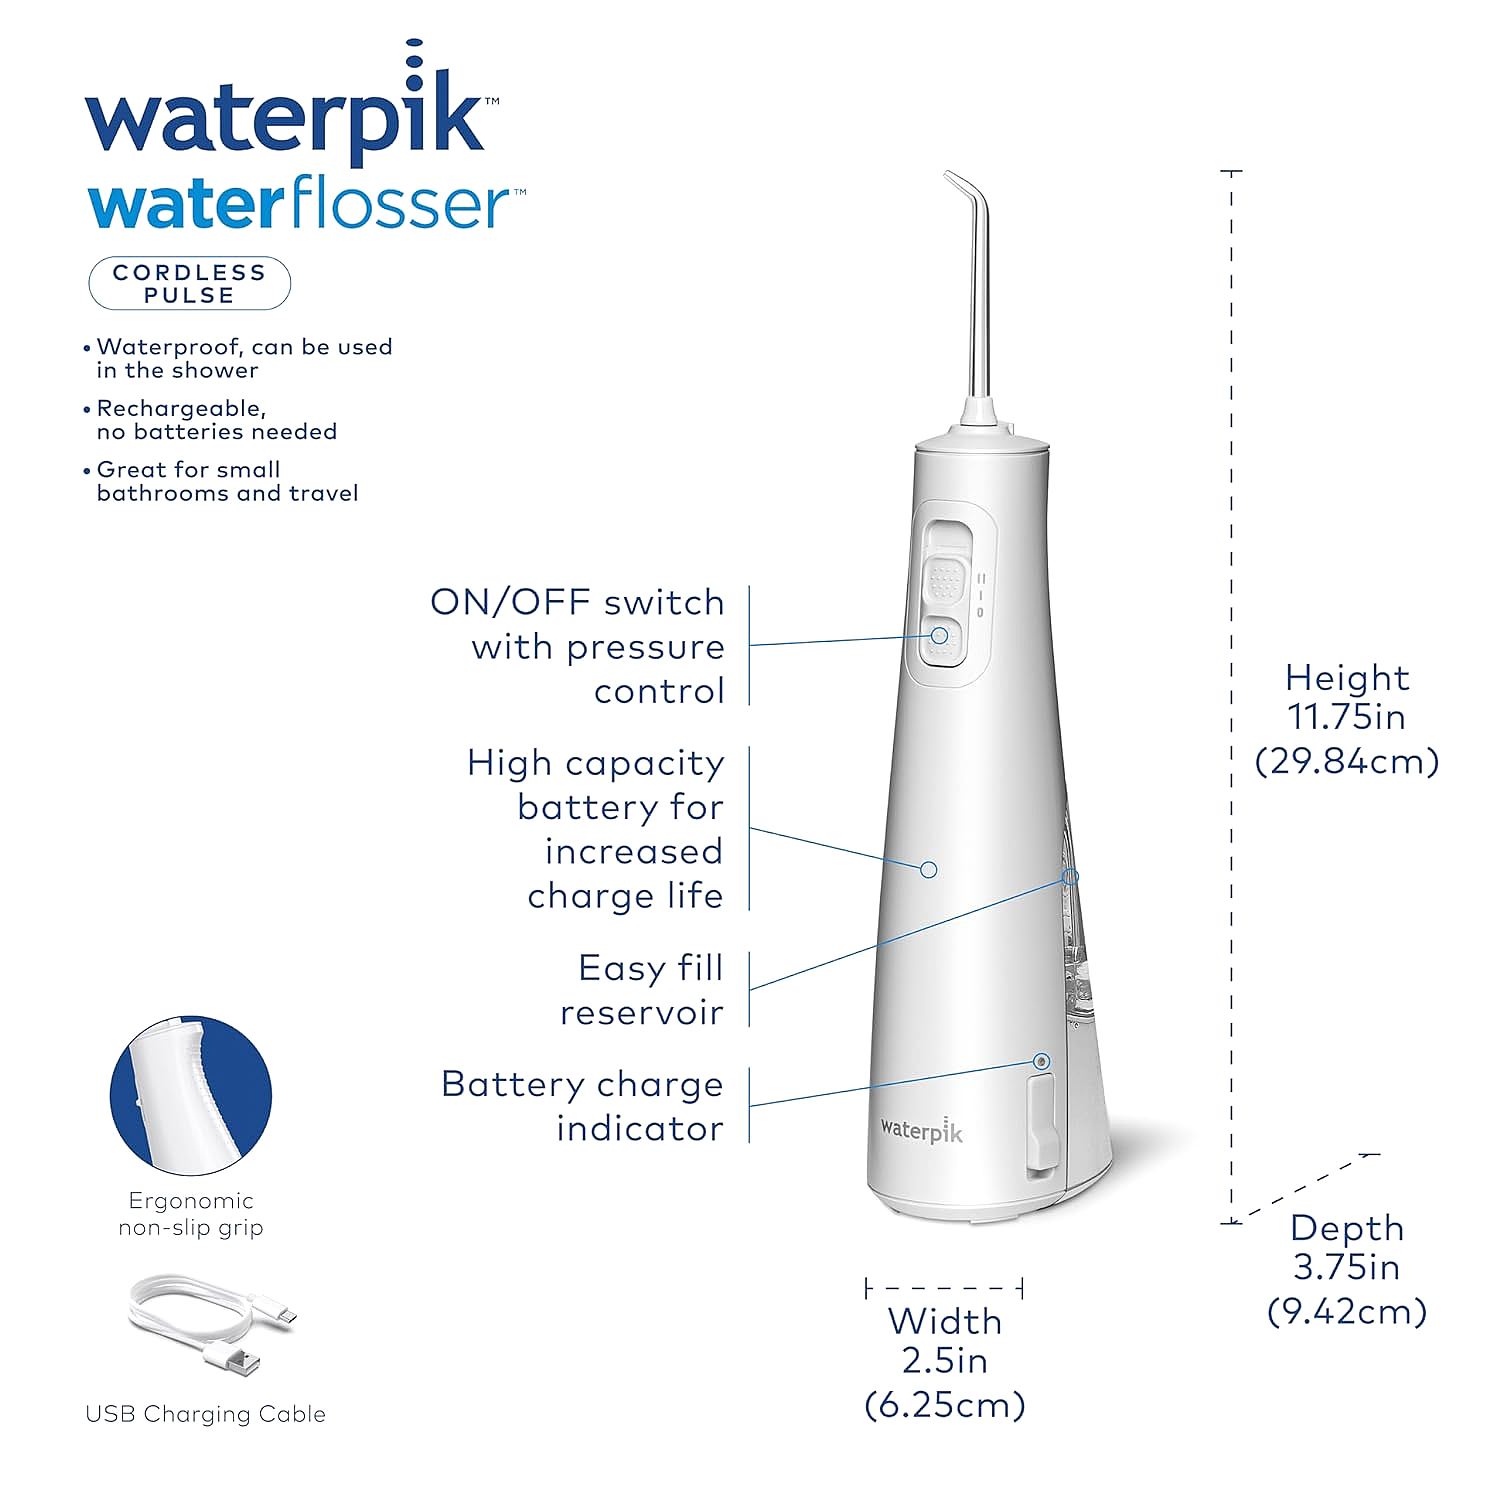  Waterpik WF-20CD010 Cordless Pulse Rechargeable Portable Water Flosser for Teeth    